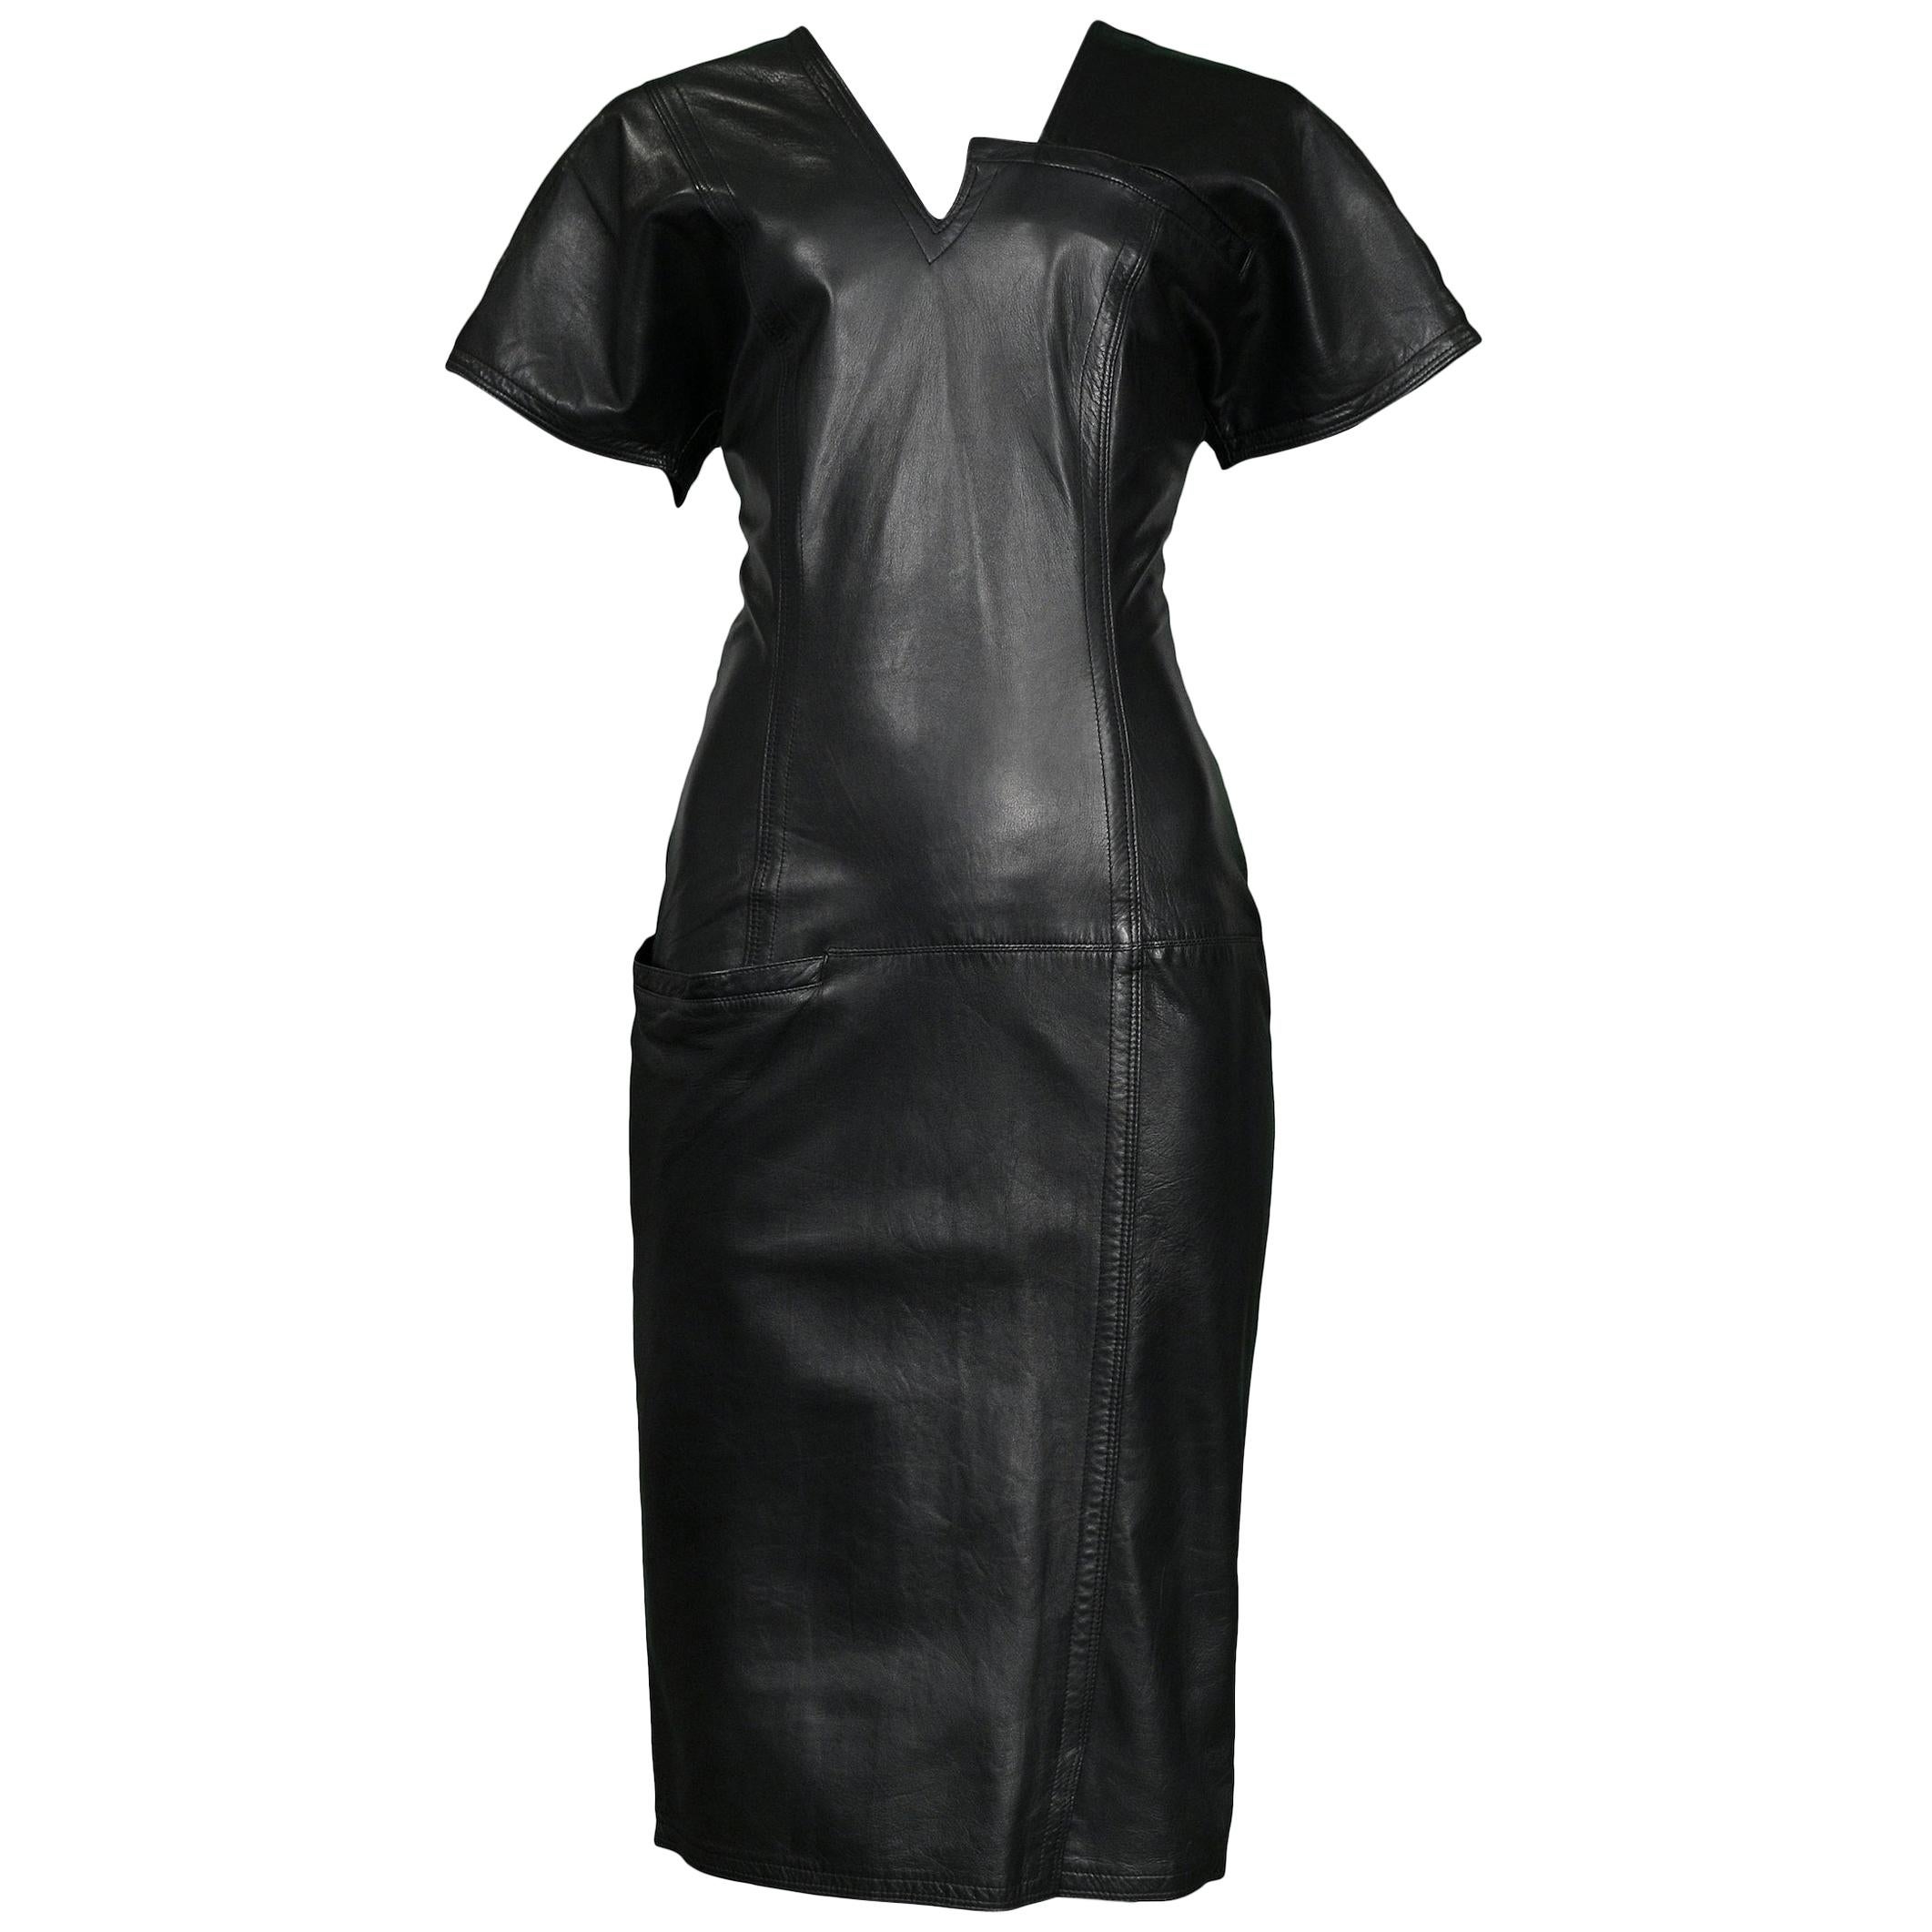 Vintage Gianni Versace Black Leather Architectural Dress For Sale